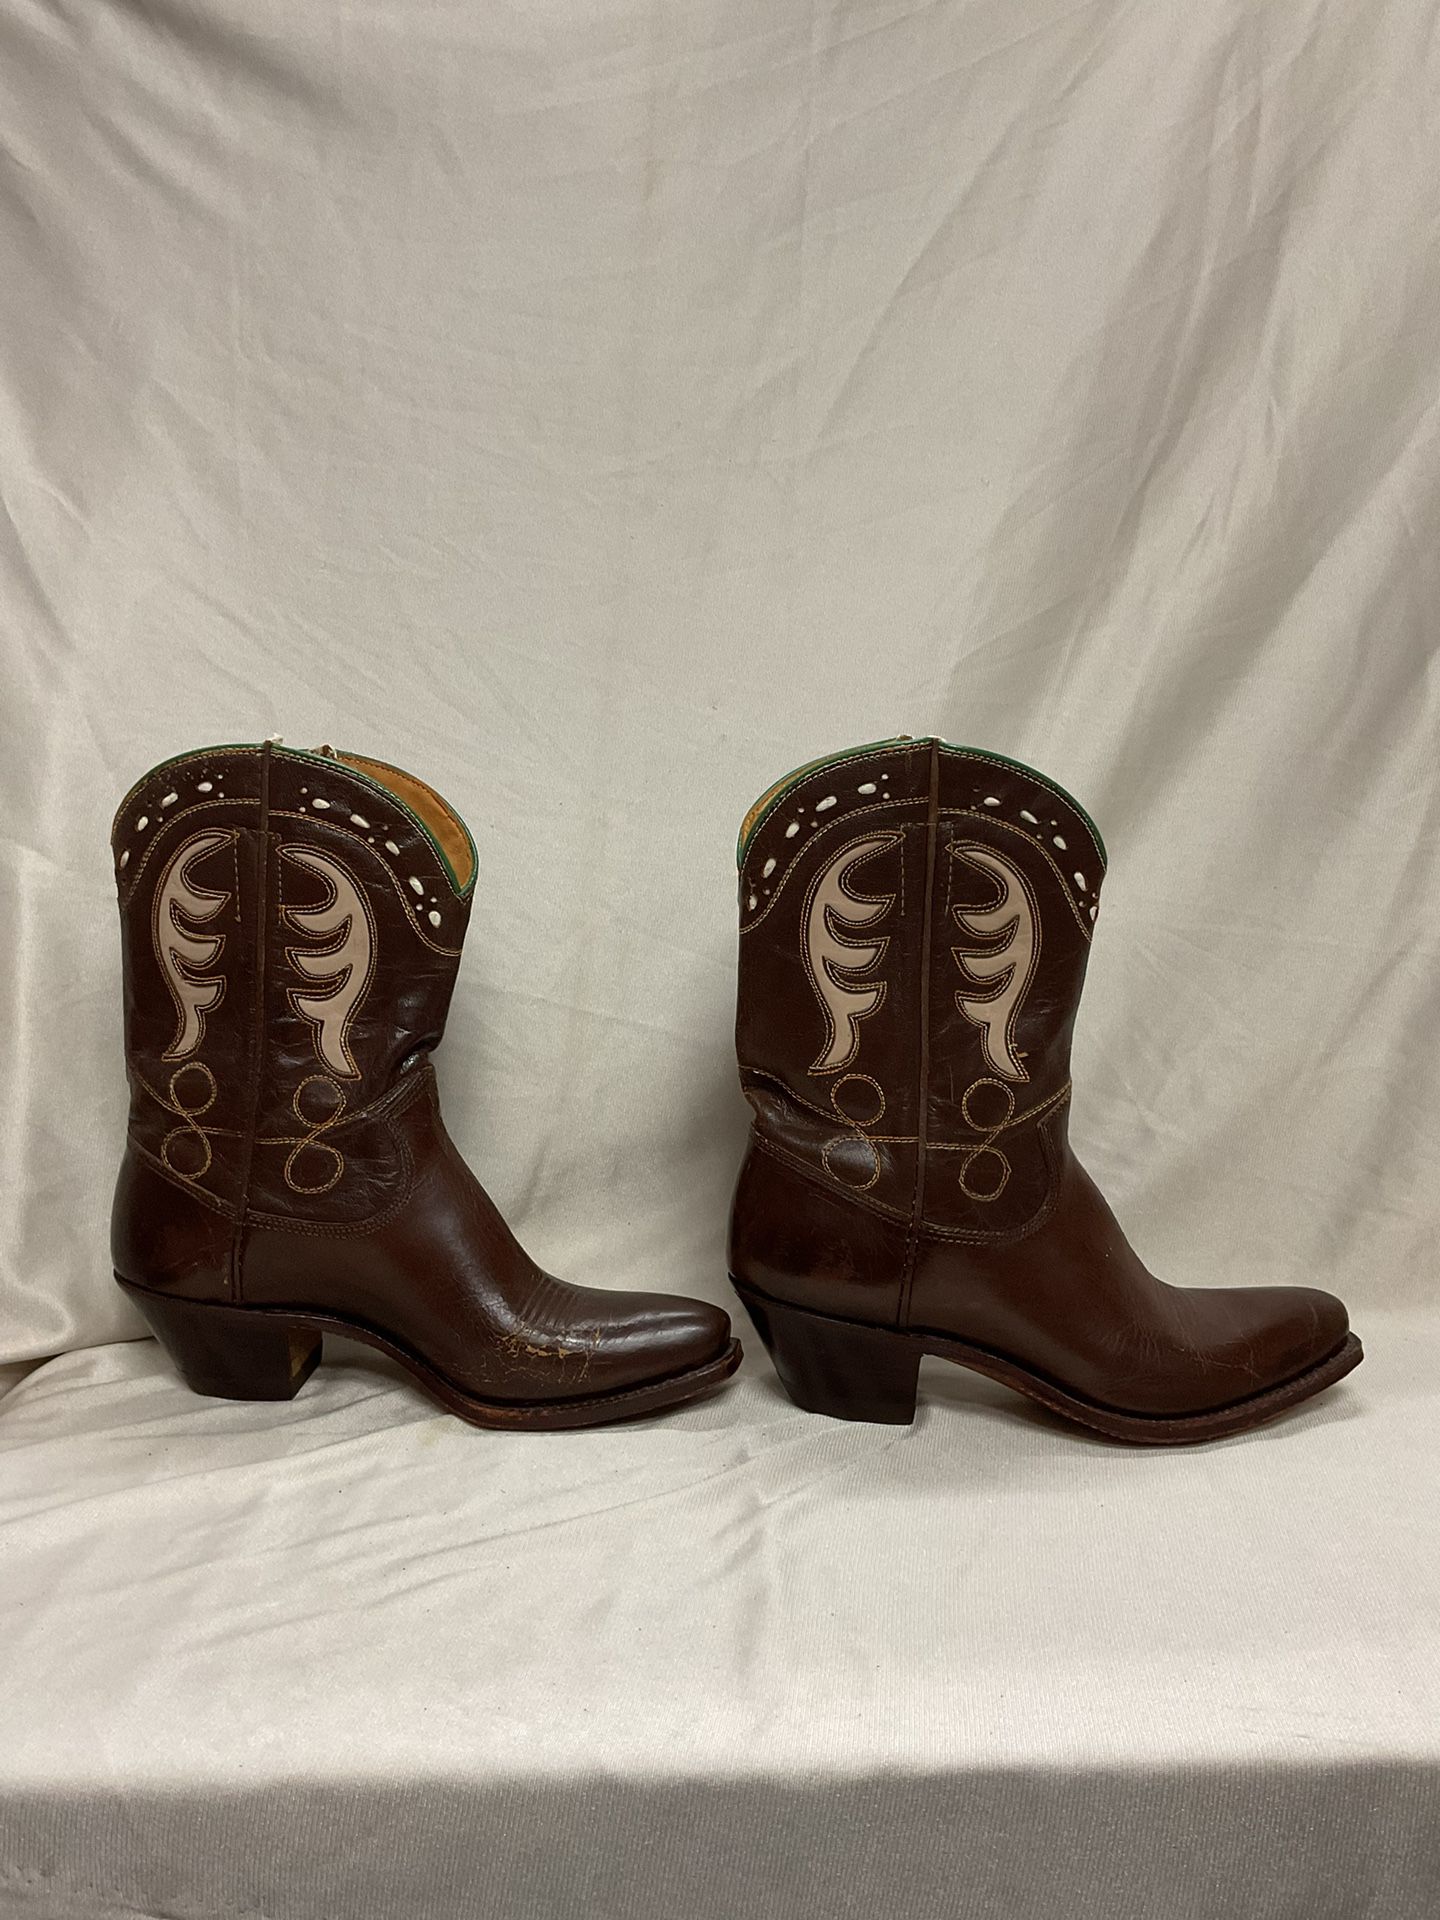 Size 8 Brown Leather Acme Cowboy Boots. Needs Repair. 